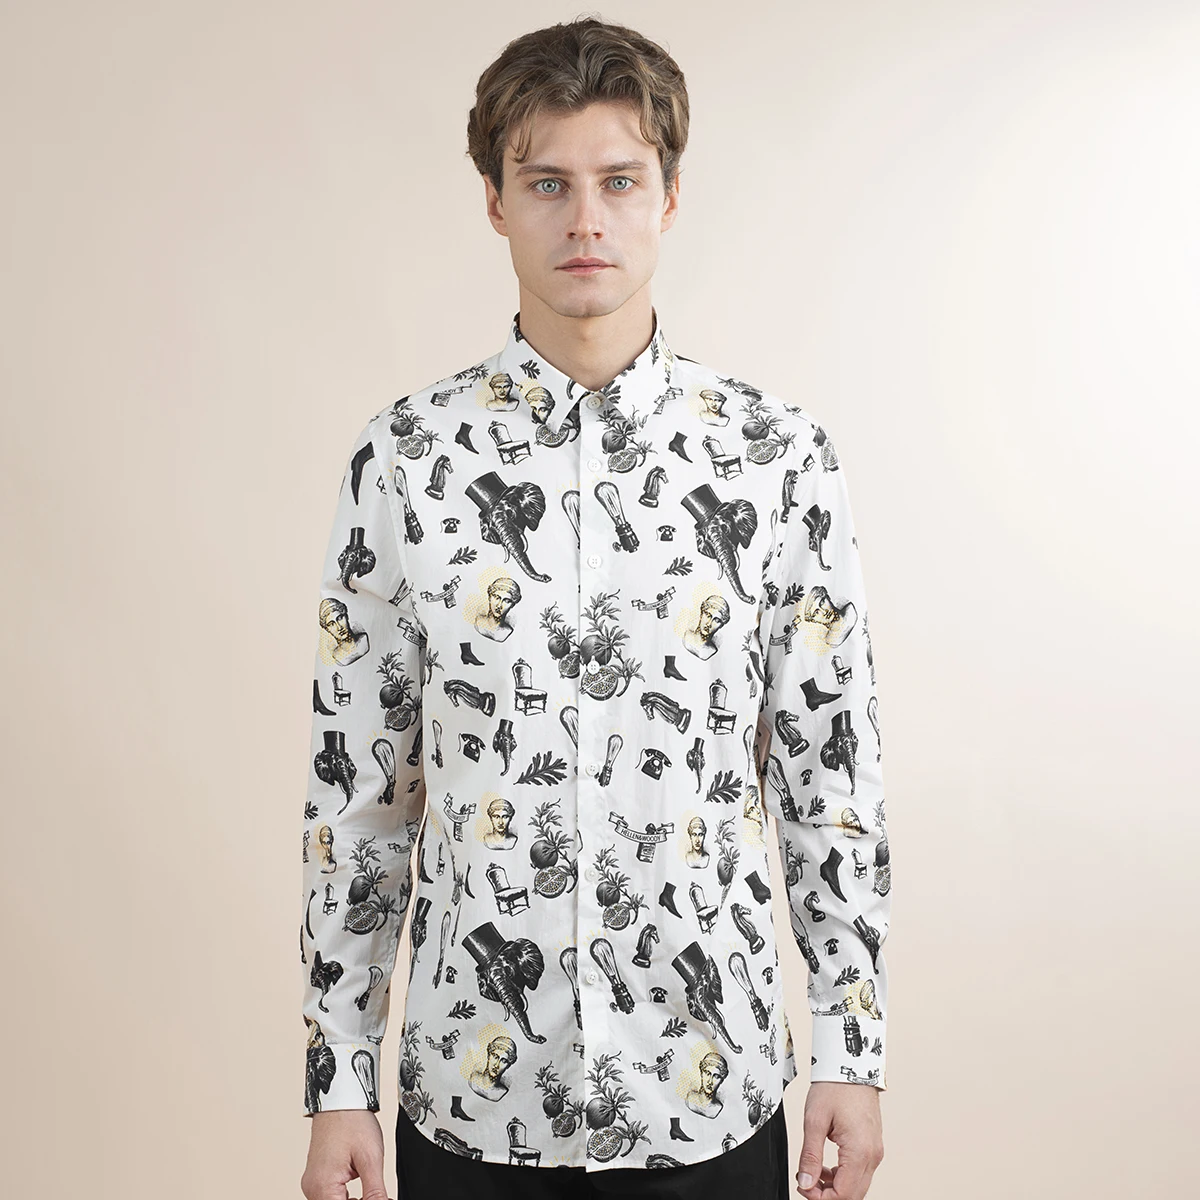 HELLEN&WOODY Spring Summer Mens Casual Abstract Print Shirt Long Sleeve Holiday Travel Shirts Fashion Cotton Blend Slim-fit Clot